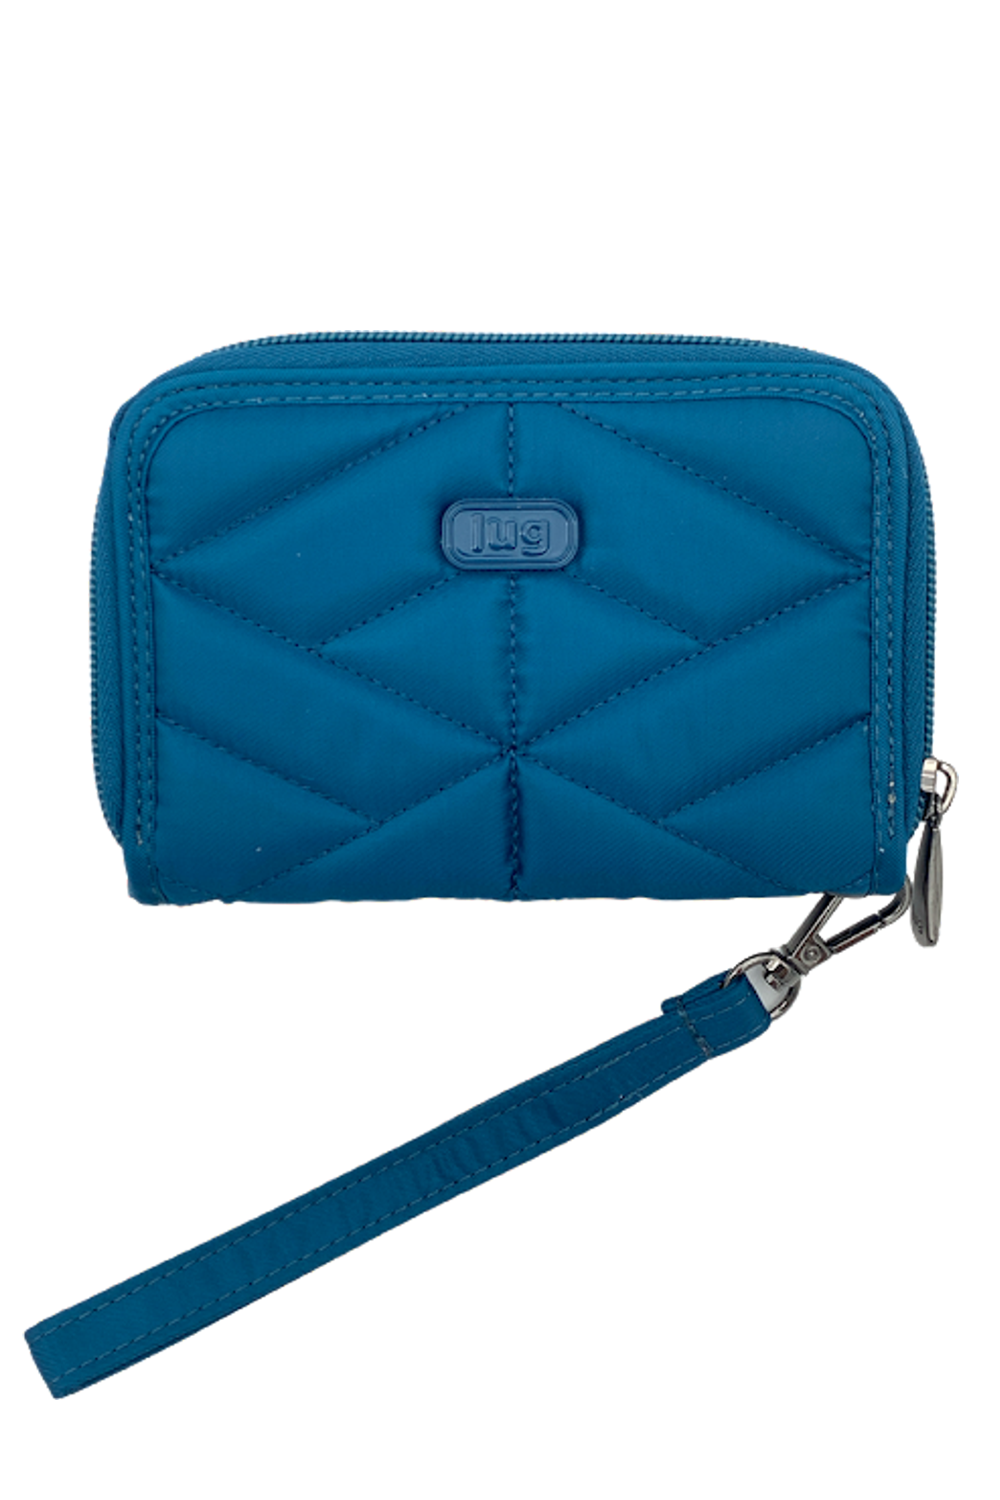 Lug RFID Quilted Wristlet Wallet - Rodeo 2